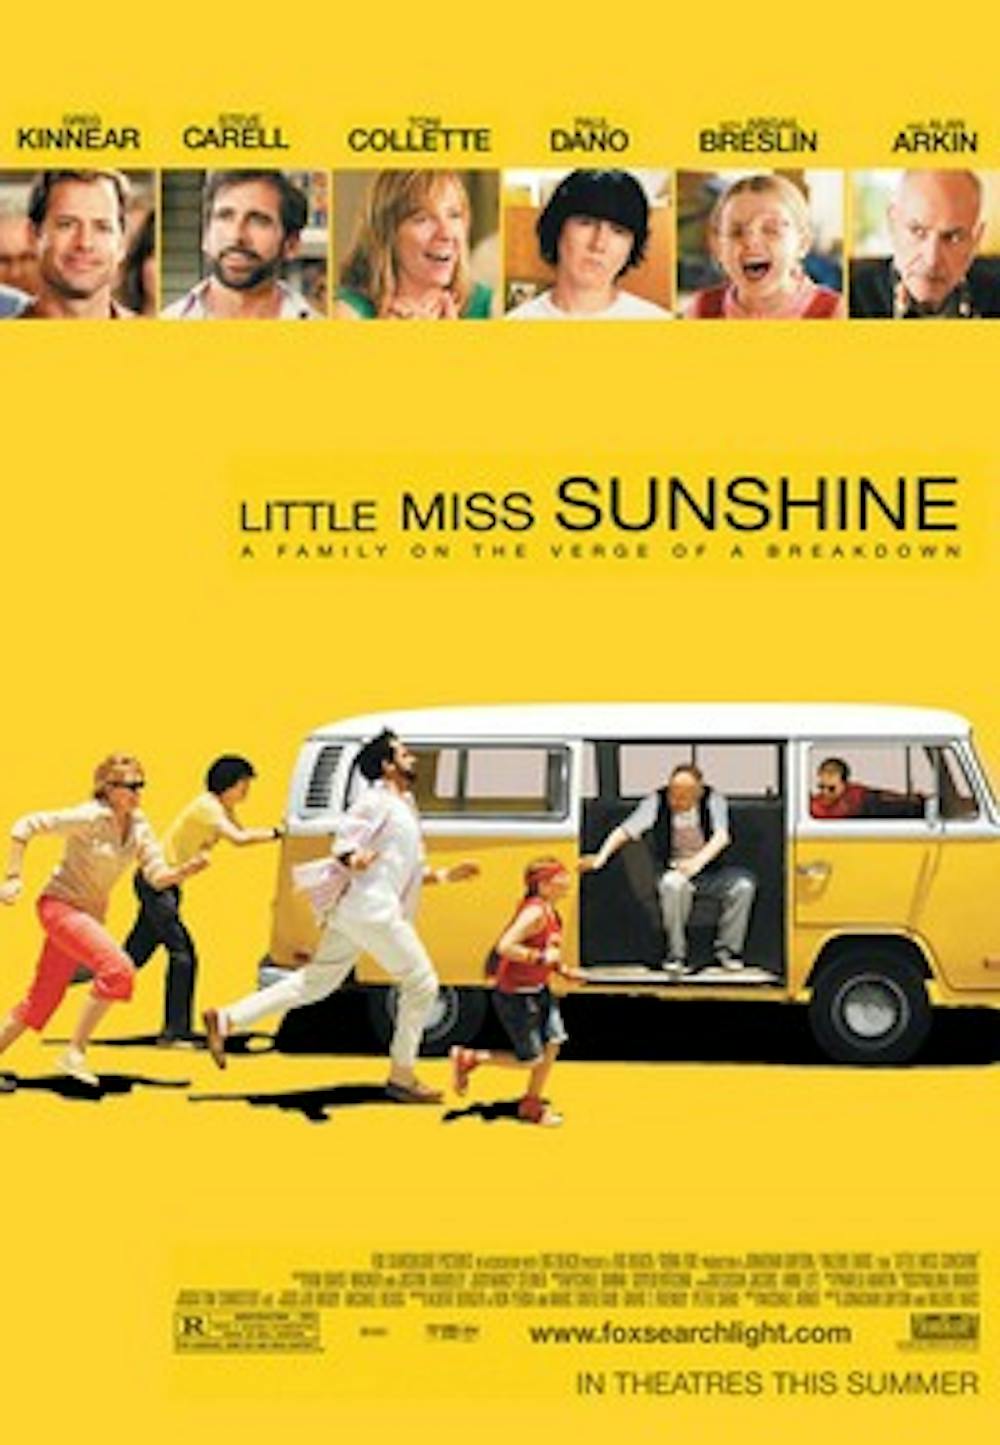 <p>Ten years after the release of "Little Miss Sunshine," few films are able to capture the quirk and ingenuity of this unique movie.</p>